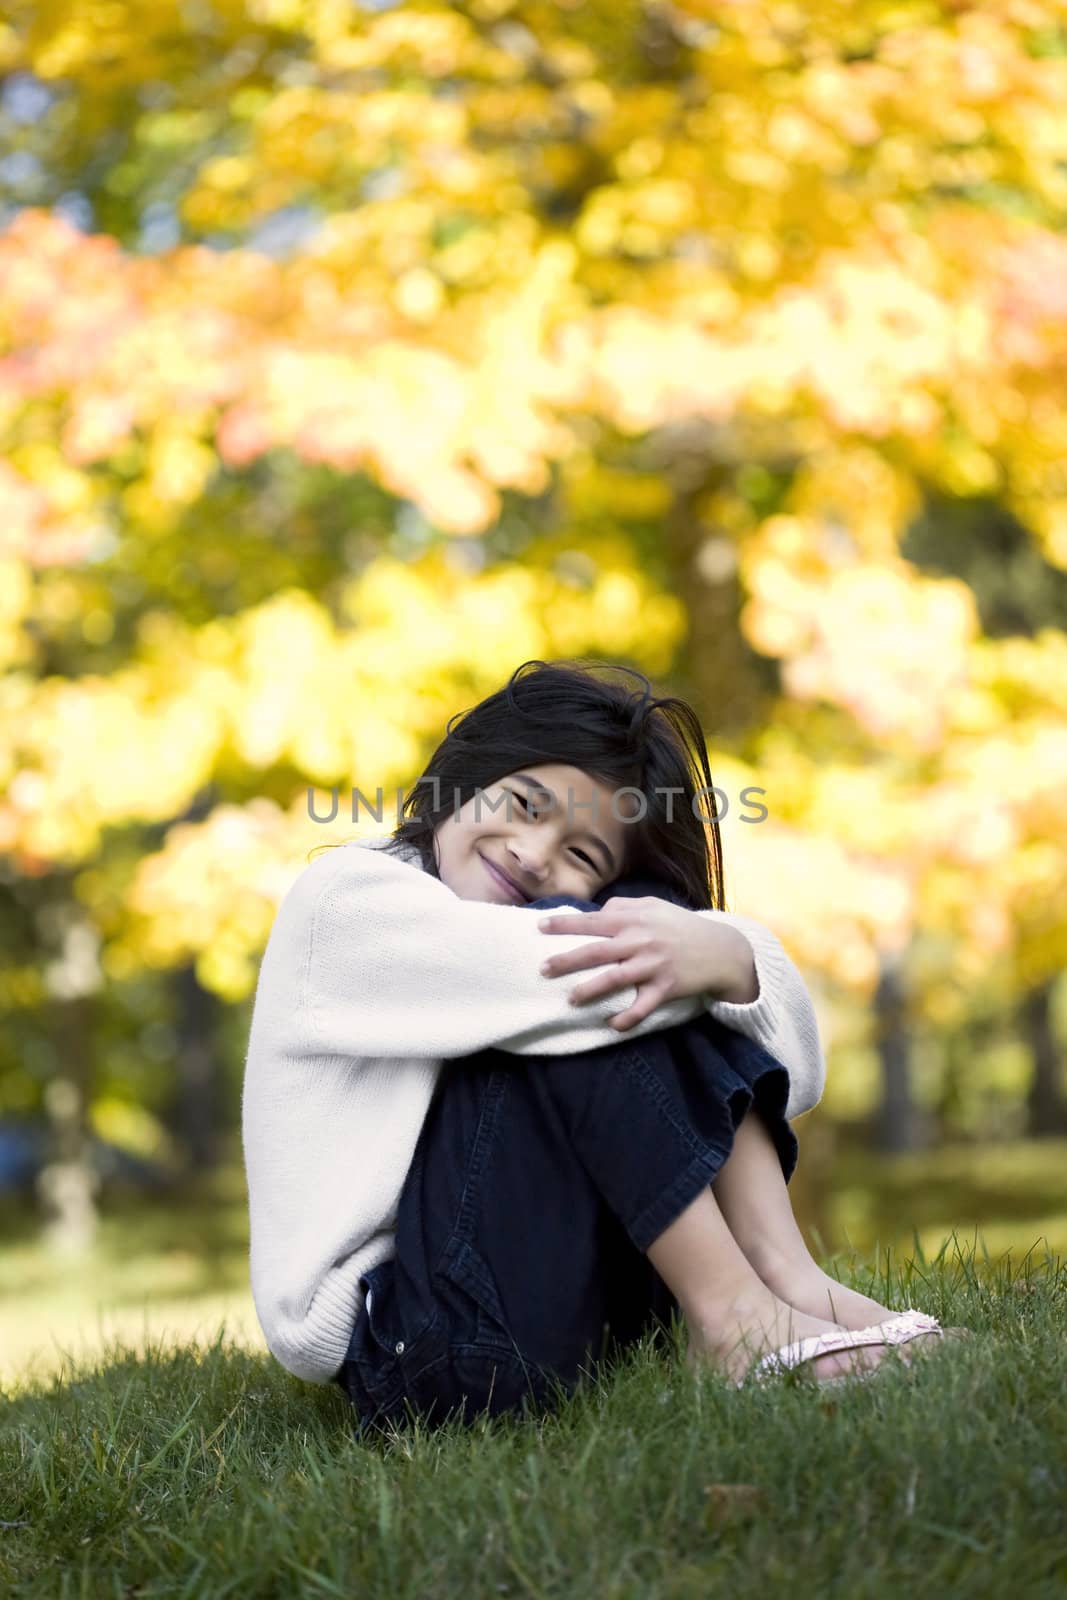 Little girl hugging knees sitting on lawn against bright autumn leaves in background by jarenwicklund